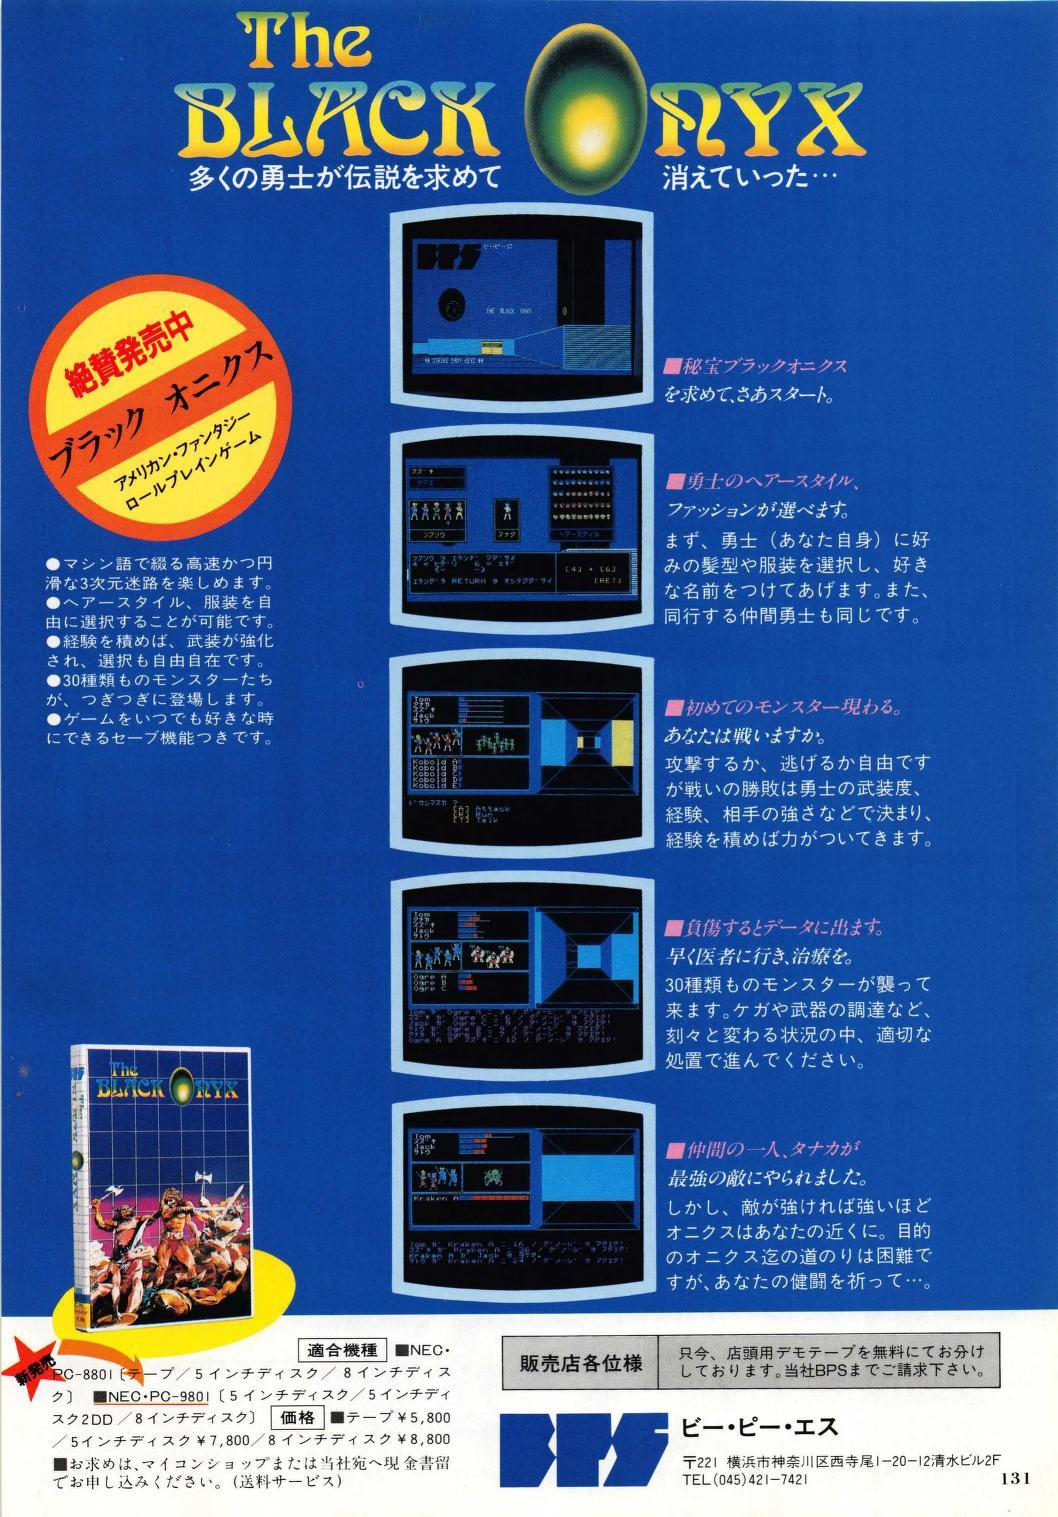 ‘The Black Onyx’[PC88 / PC98] [JAPAN] [MAGAZINE] [1984]
• I/O, June 1984
• Scanned by taihen, via The Internet Archive
• What if I told you that the Japanese RPG we know today may have been a lot different (or non-existent) if a Dutch college student...